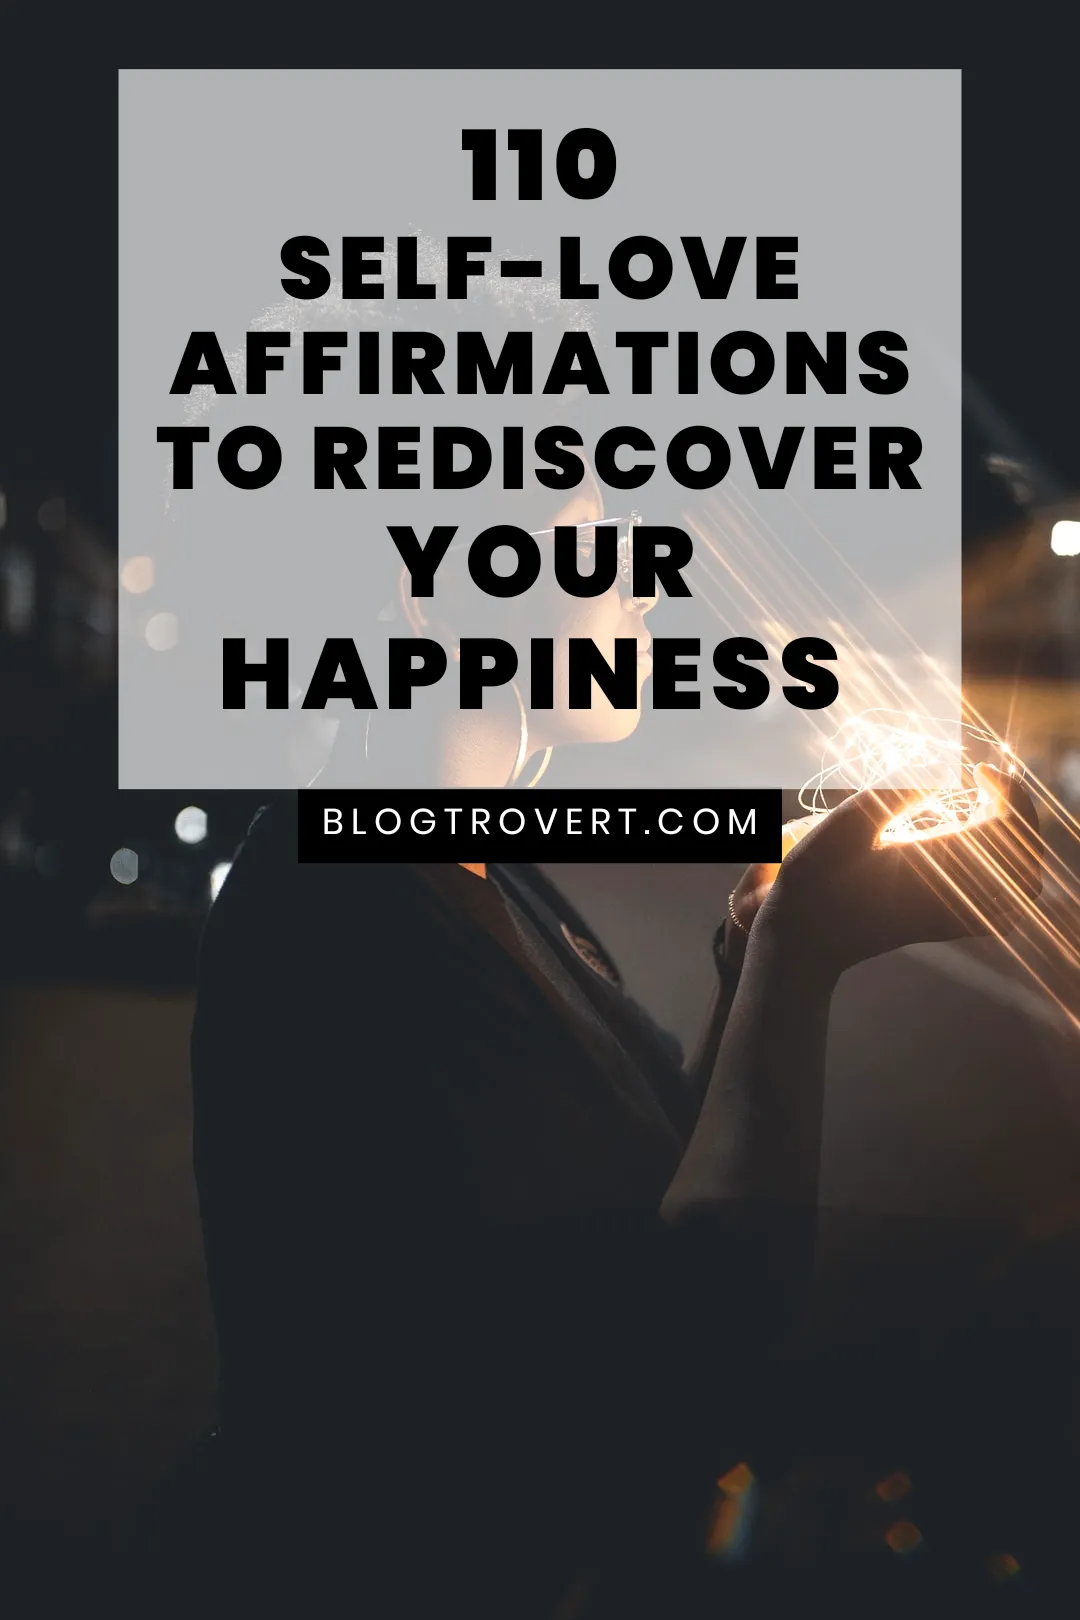 110 powerful affirmations for self-love 4